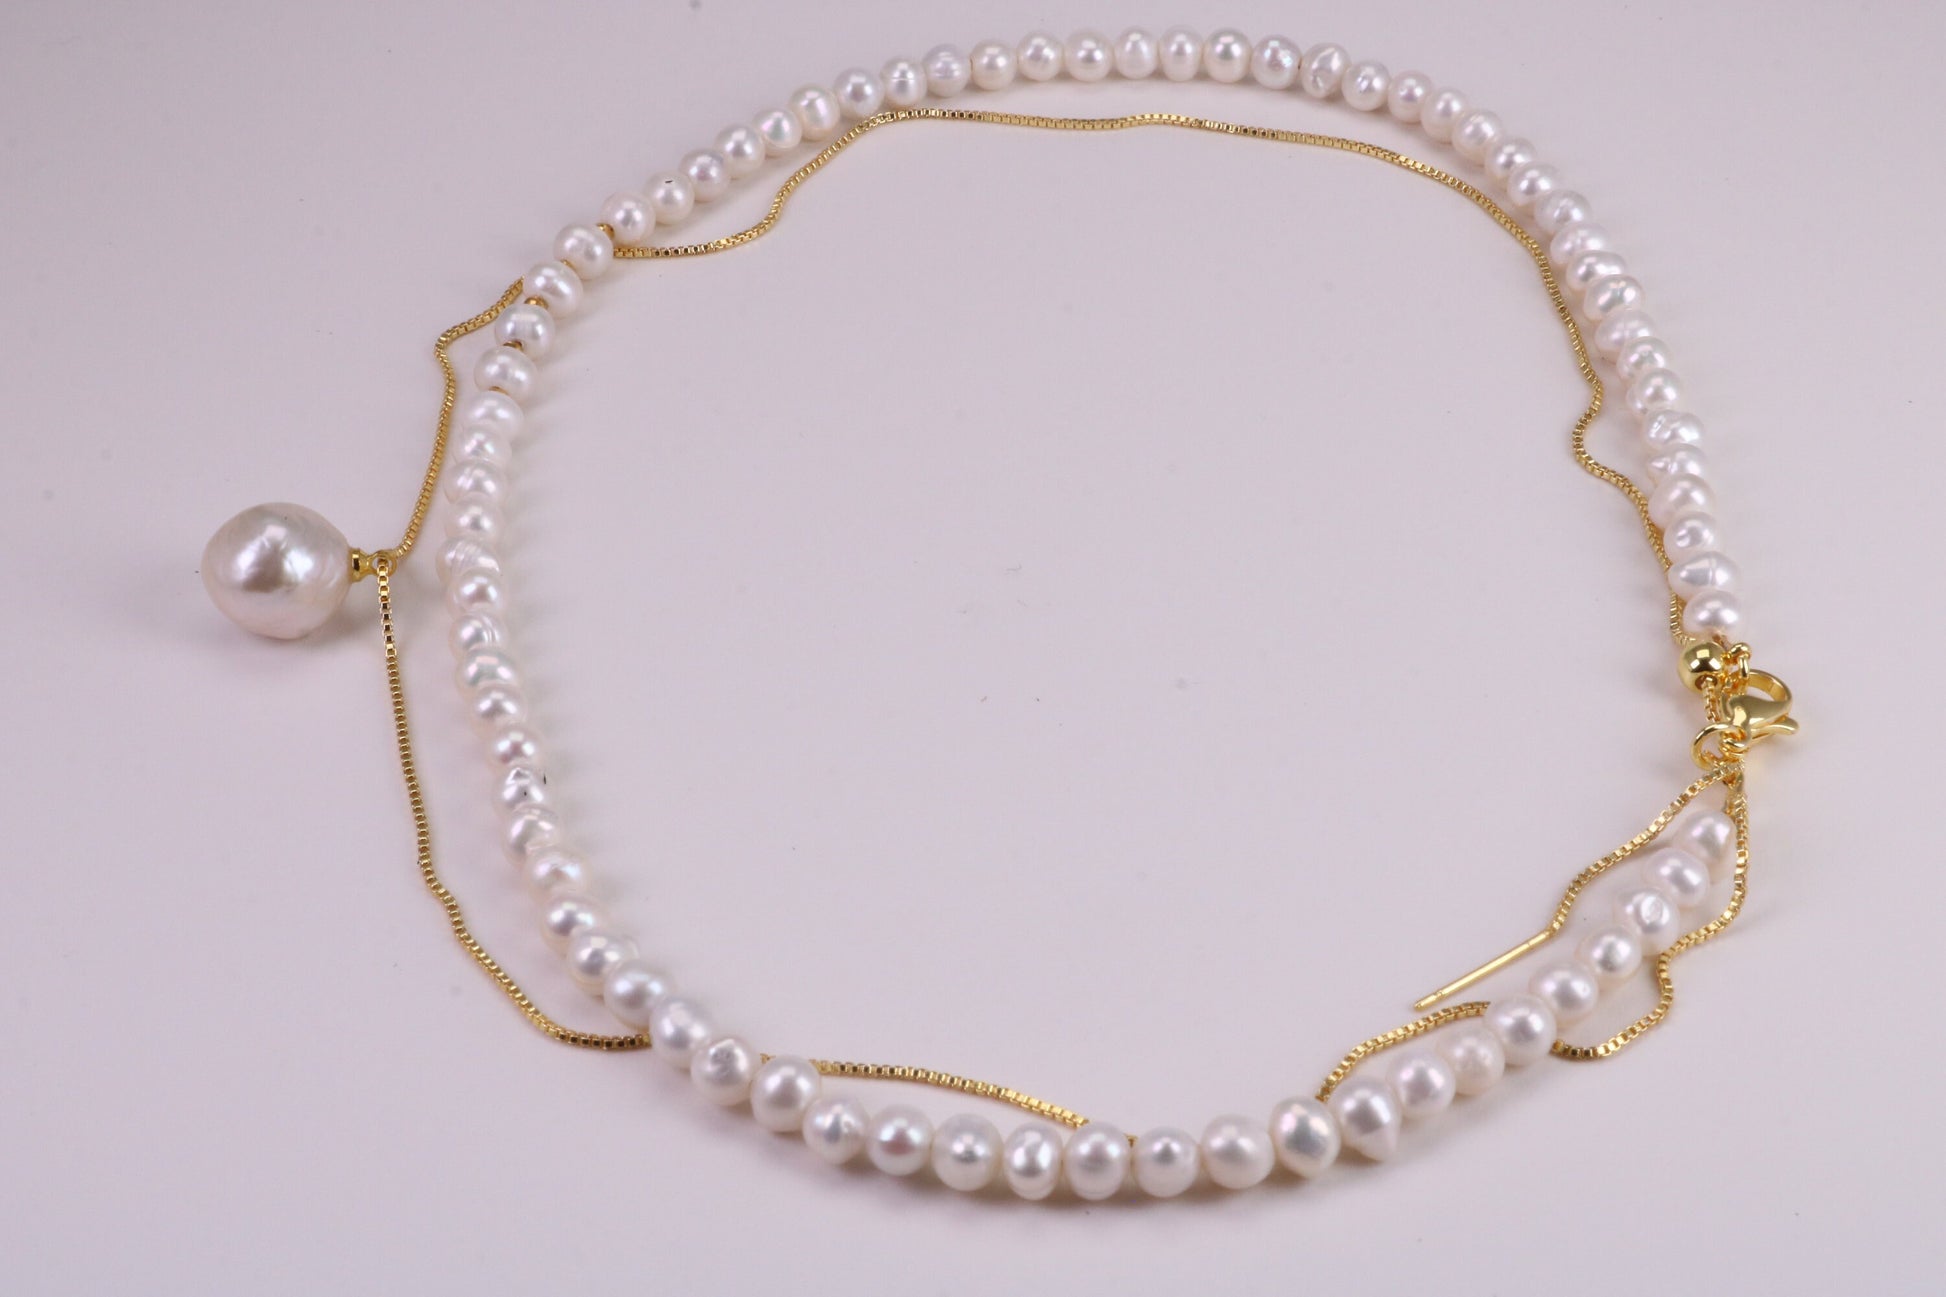 Single Strand Natural 8 mm Round Pearl Necklace with Single Pearl Pendant Chain set in Silver and 18ct Yellow Gold Plated